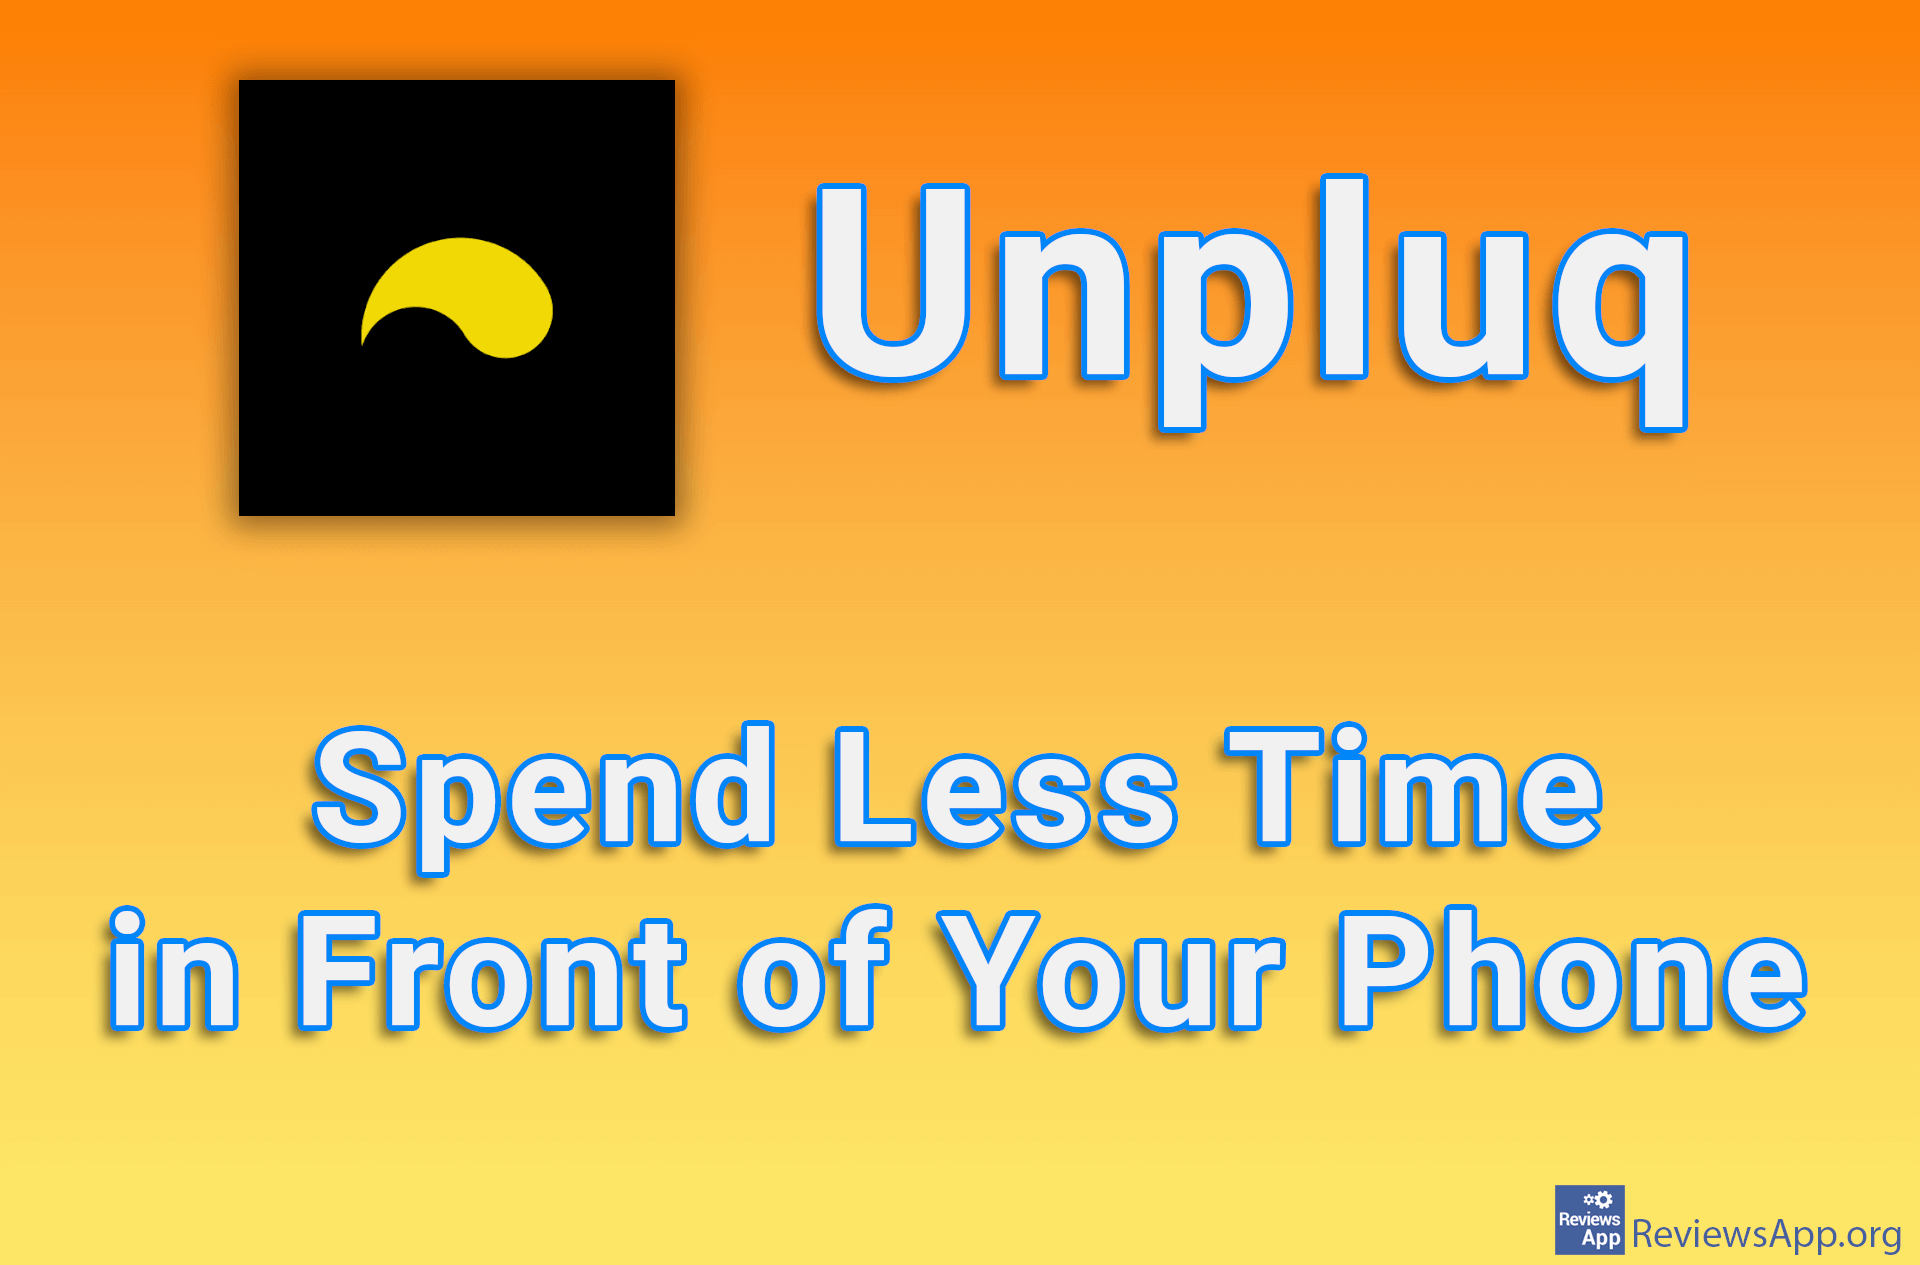 Unpluq – Spend Less Time in Front of Your Phone